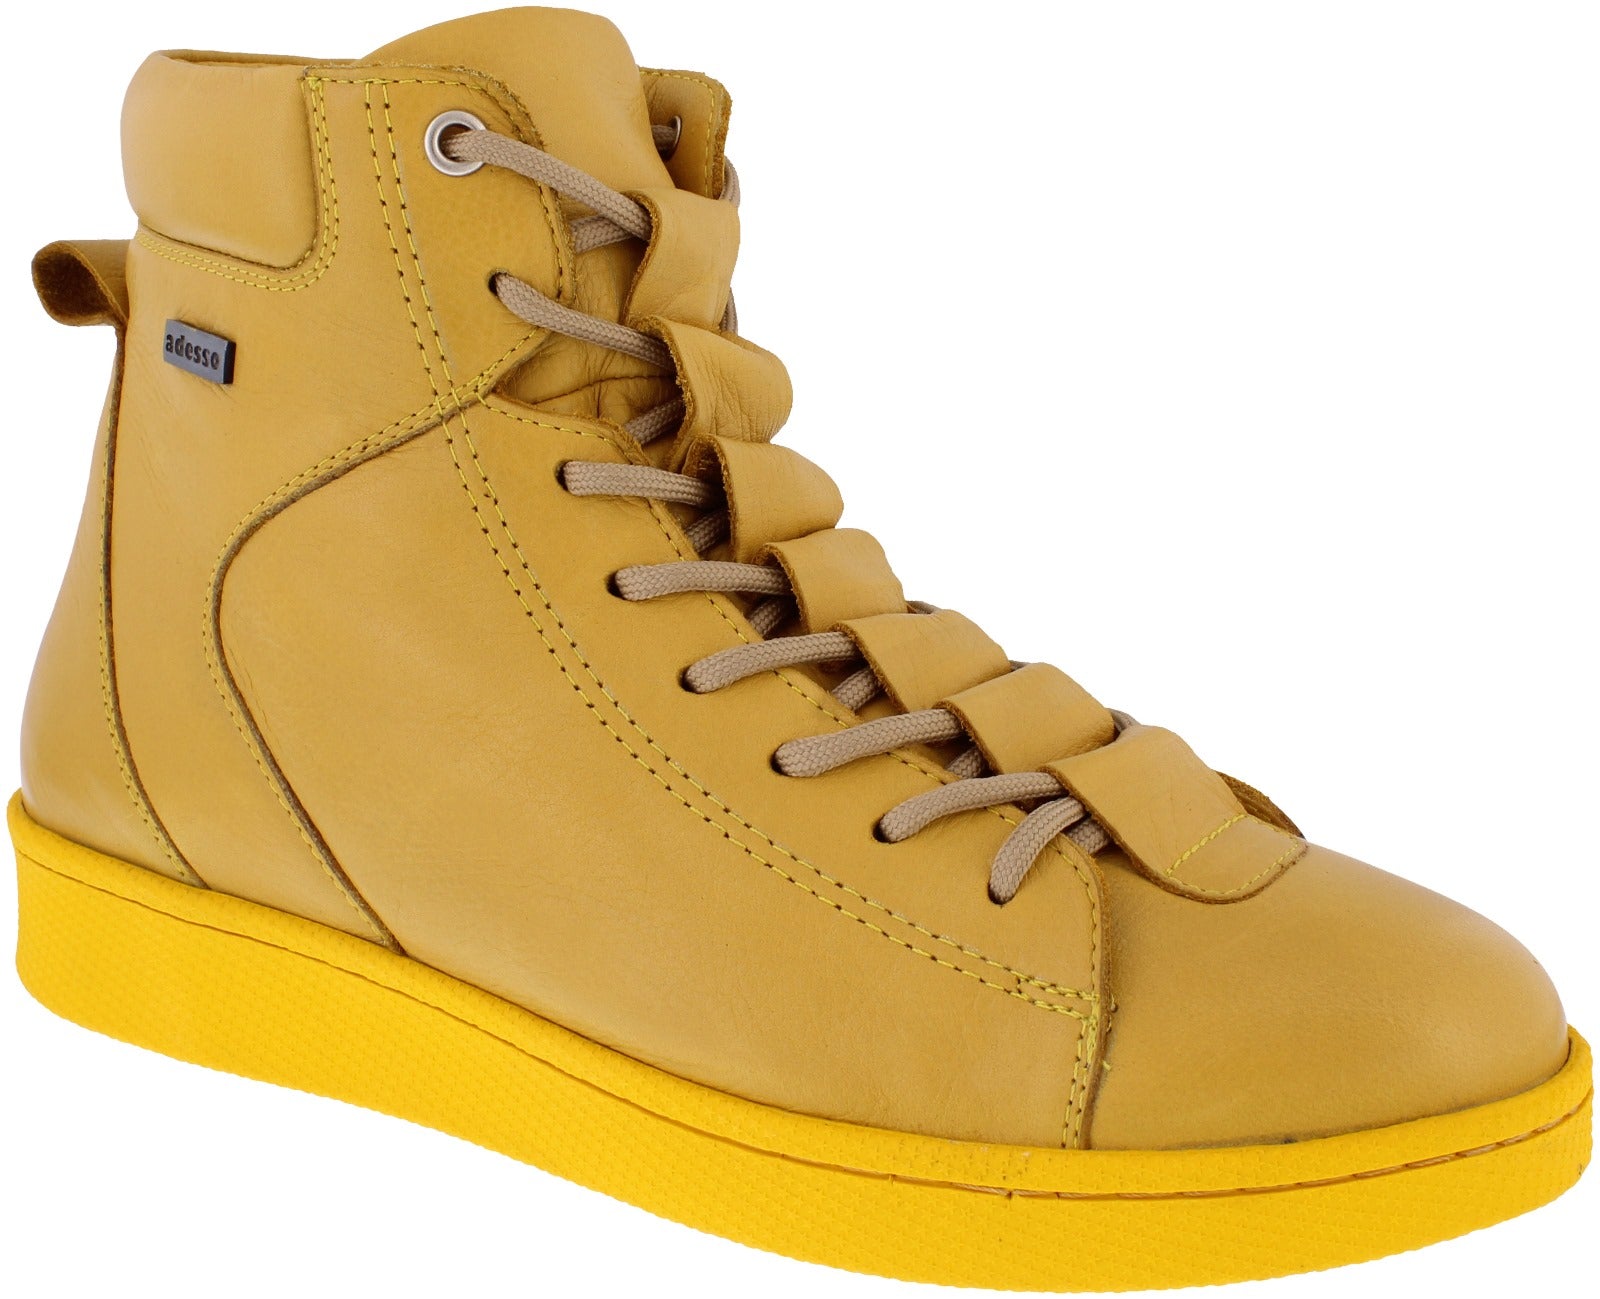 Adesso A7049 Lyla Ladies Sunshine Yellow Leather Zip & Lace Ankle Boots